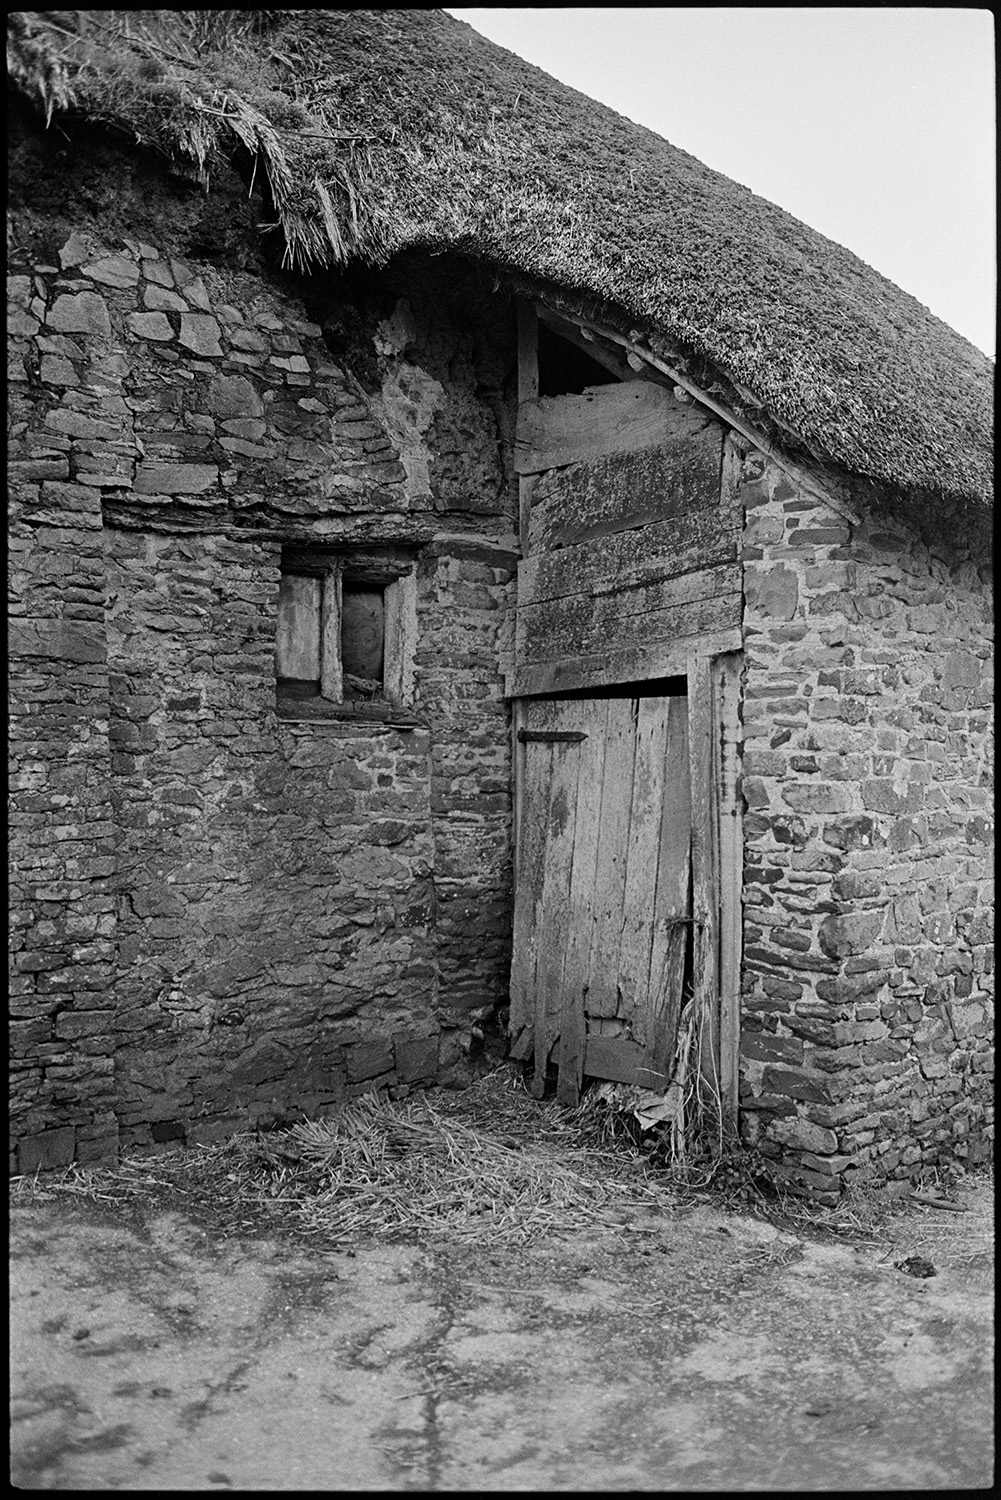 Back of derelict farmhouse stone, cob and thatch. Front in state of collapse, window.
[The back of a derelict stone and thatch cottage with a wooden door and small window, at Mary Week, near Chulmleigh.]